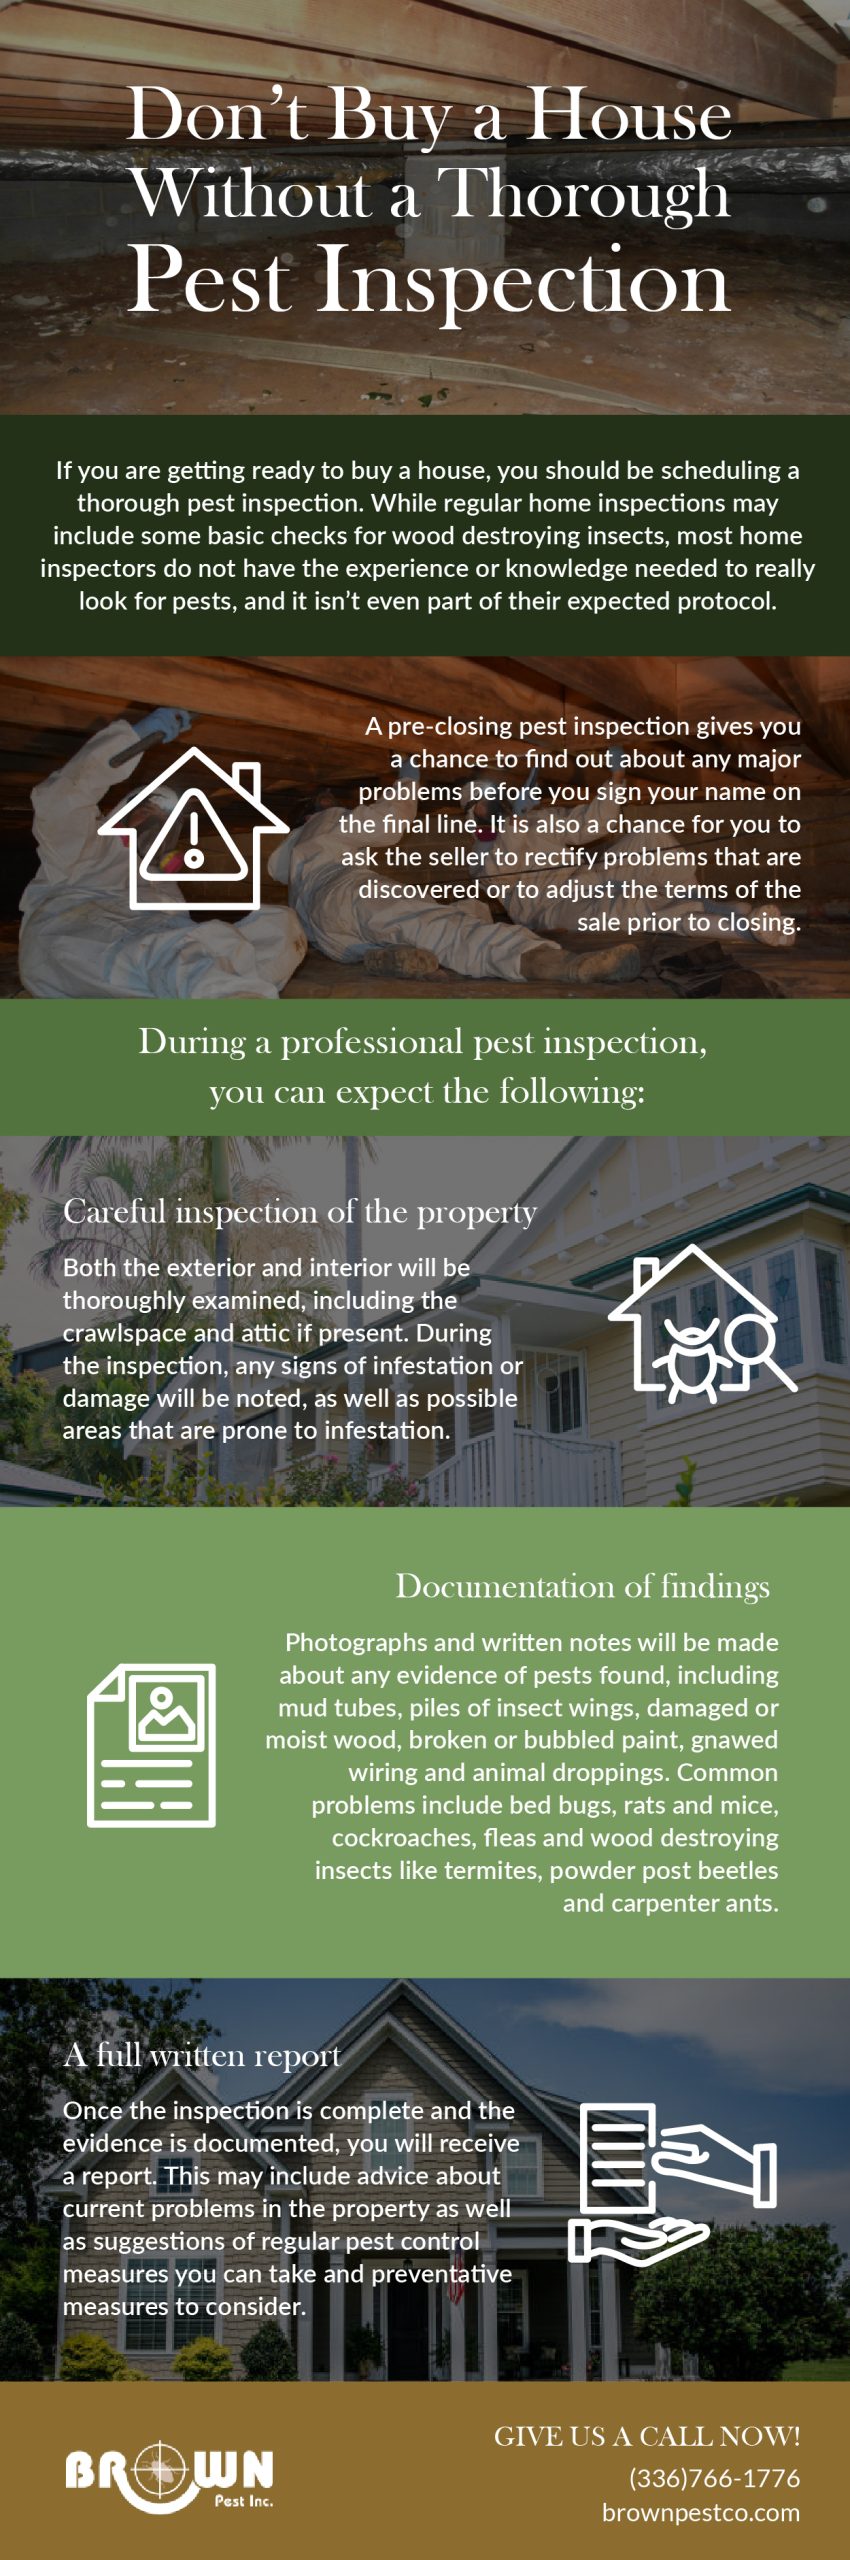 A Pest Inspection is an Important Part of the Home-Buying Process